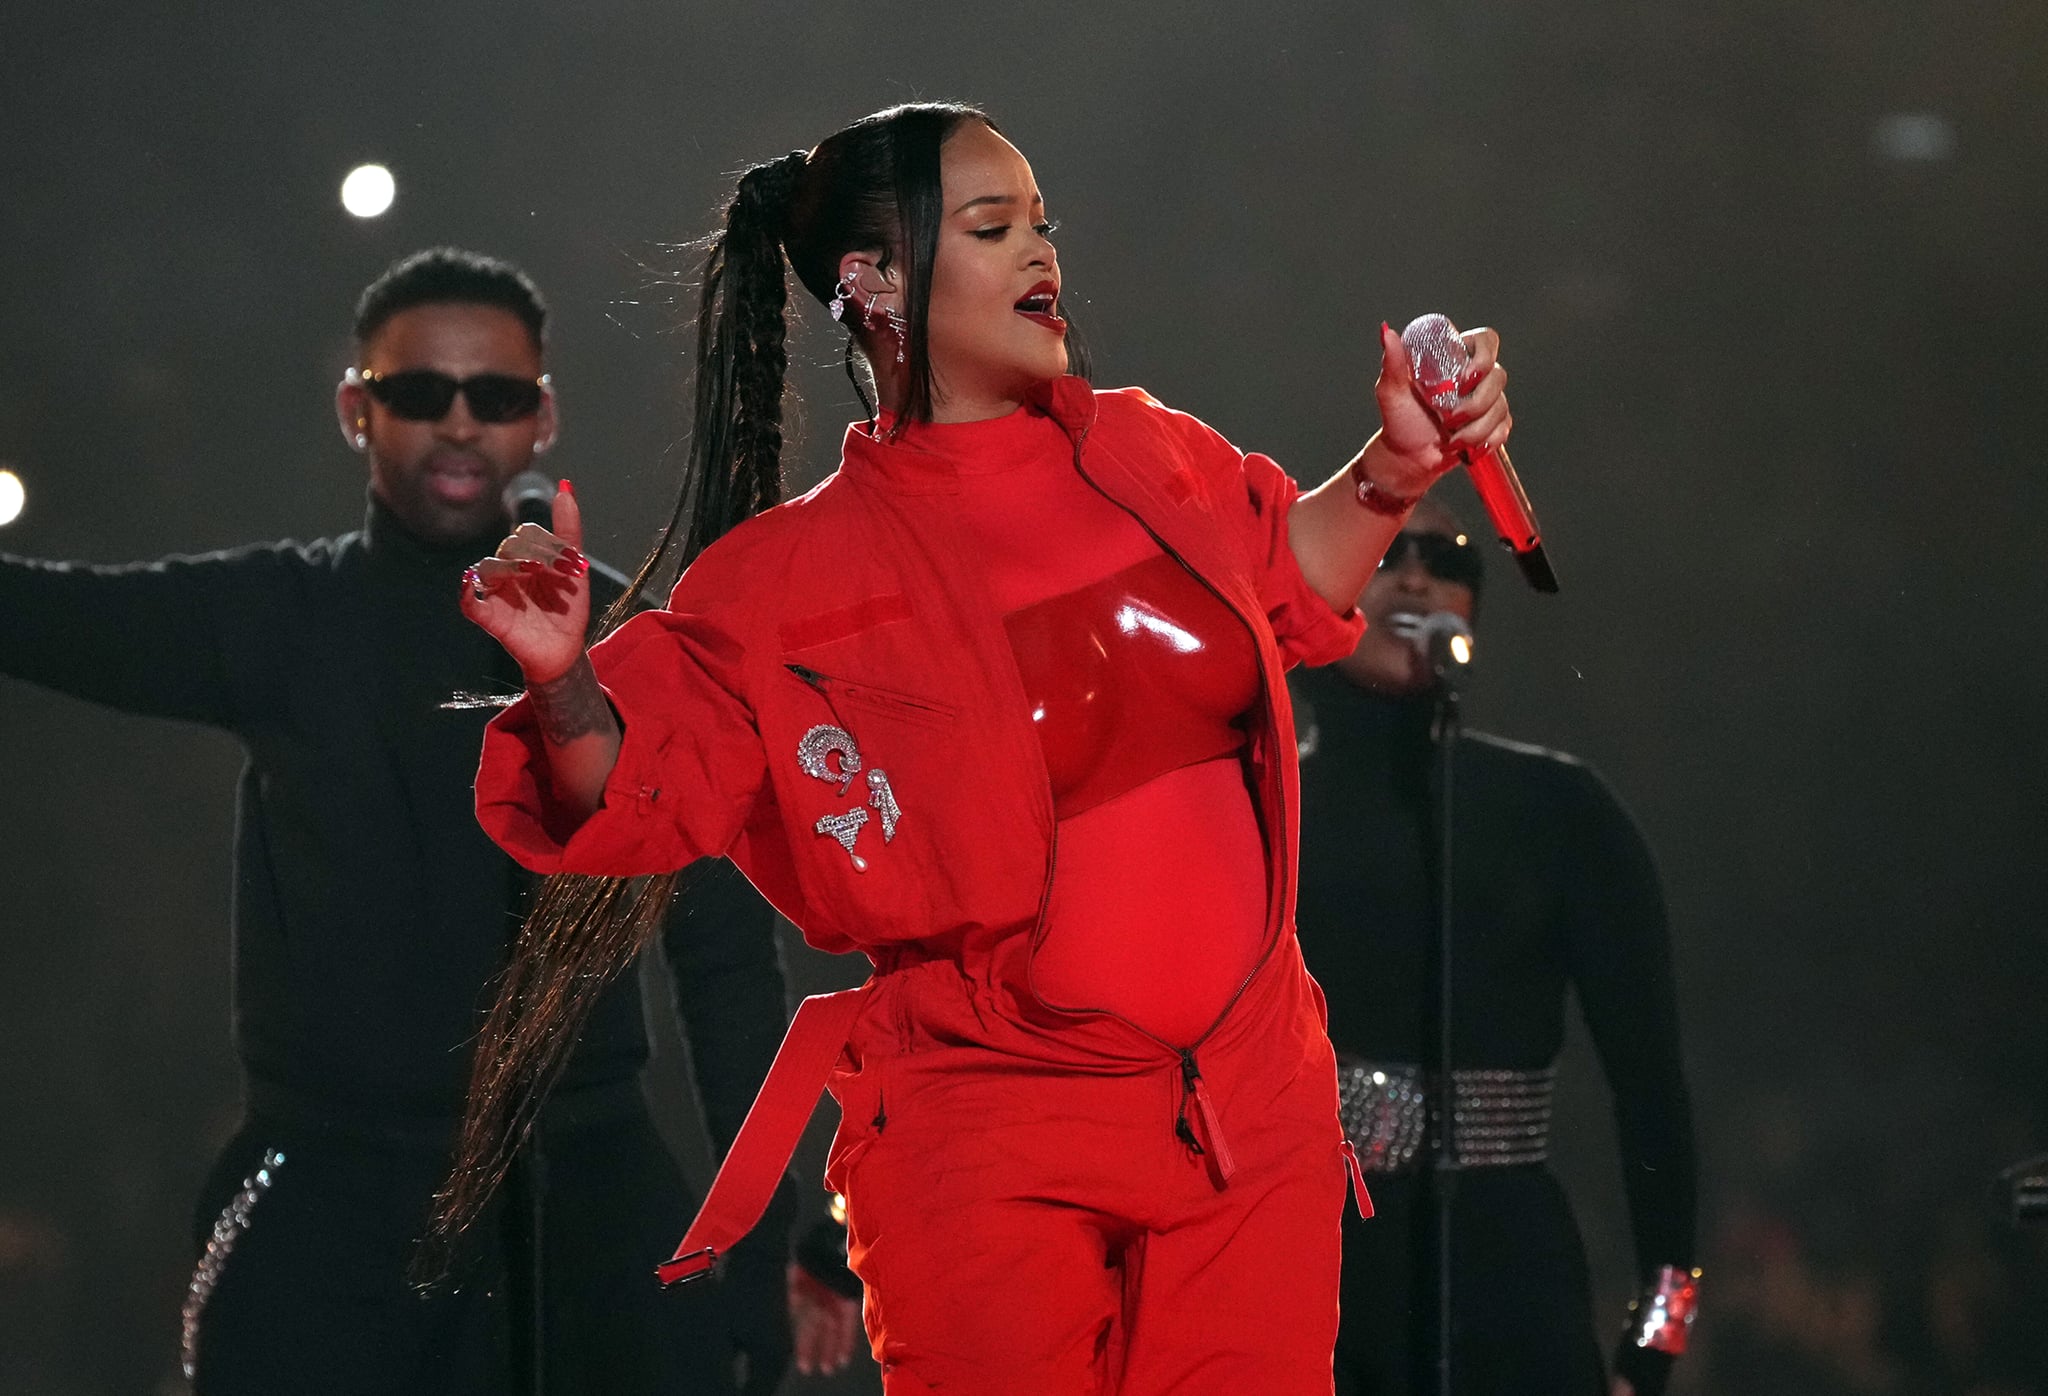   Rihanna performs during Apple Music Super Bowl LVII Halftime Show at State Farm Stadium on February 12, 2023 in Glendale, Arizona. (Photo by Kevin Mazur/Getty Images for Roc Nation)